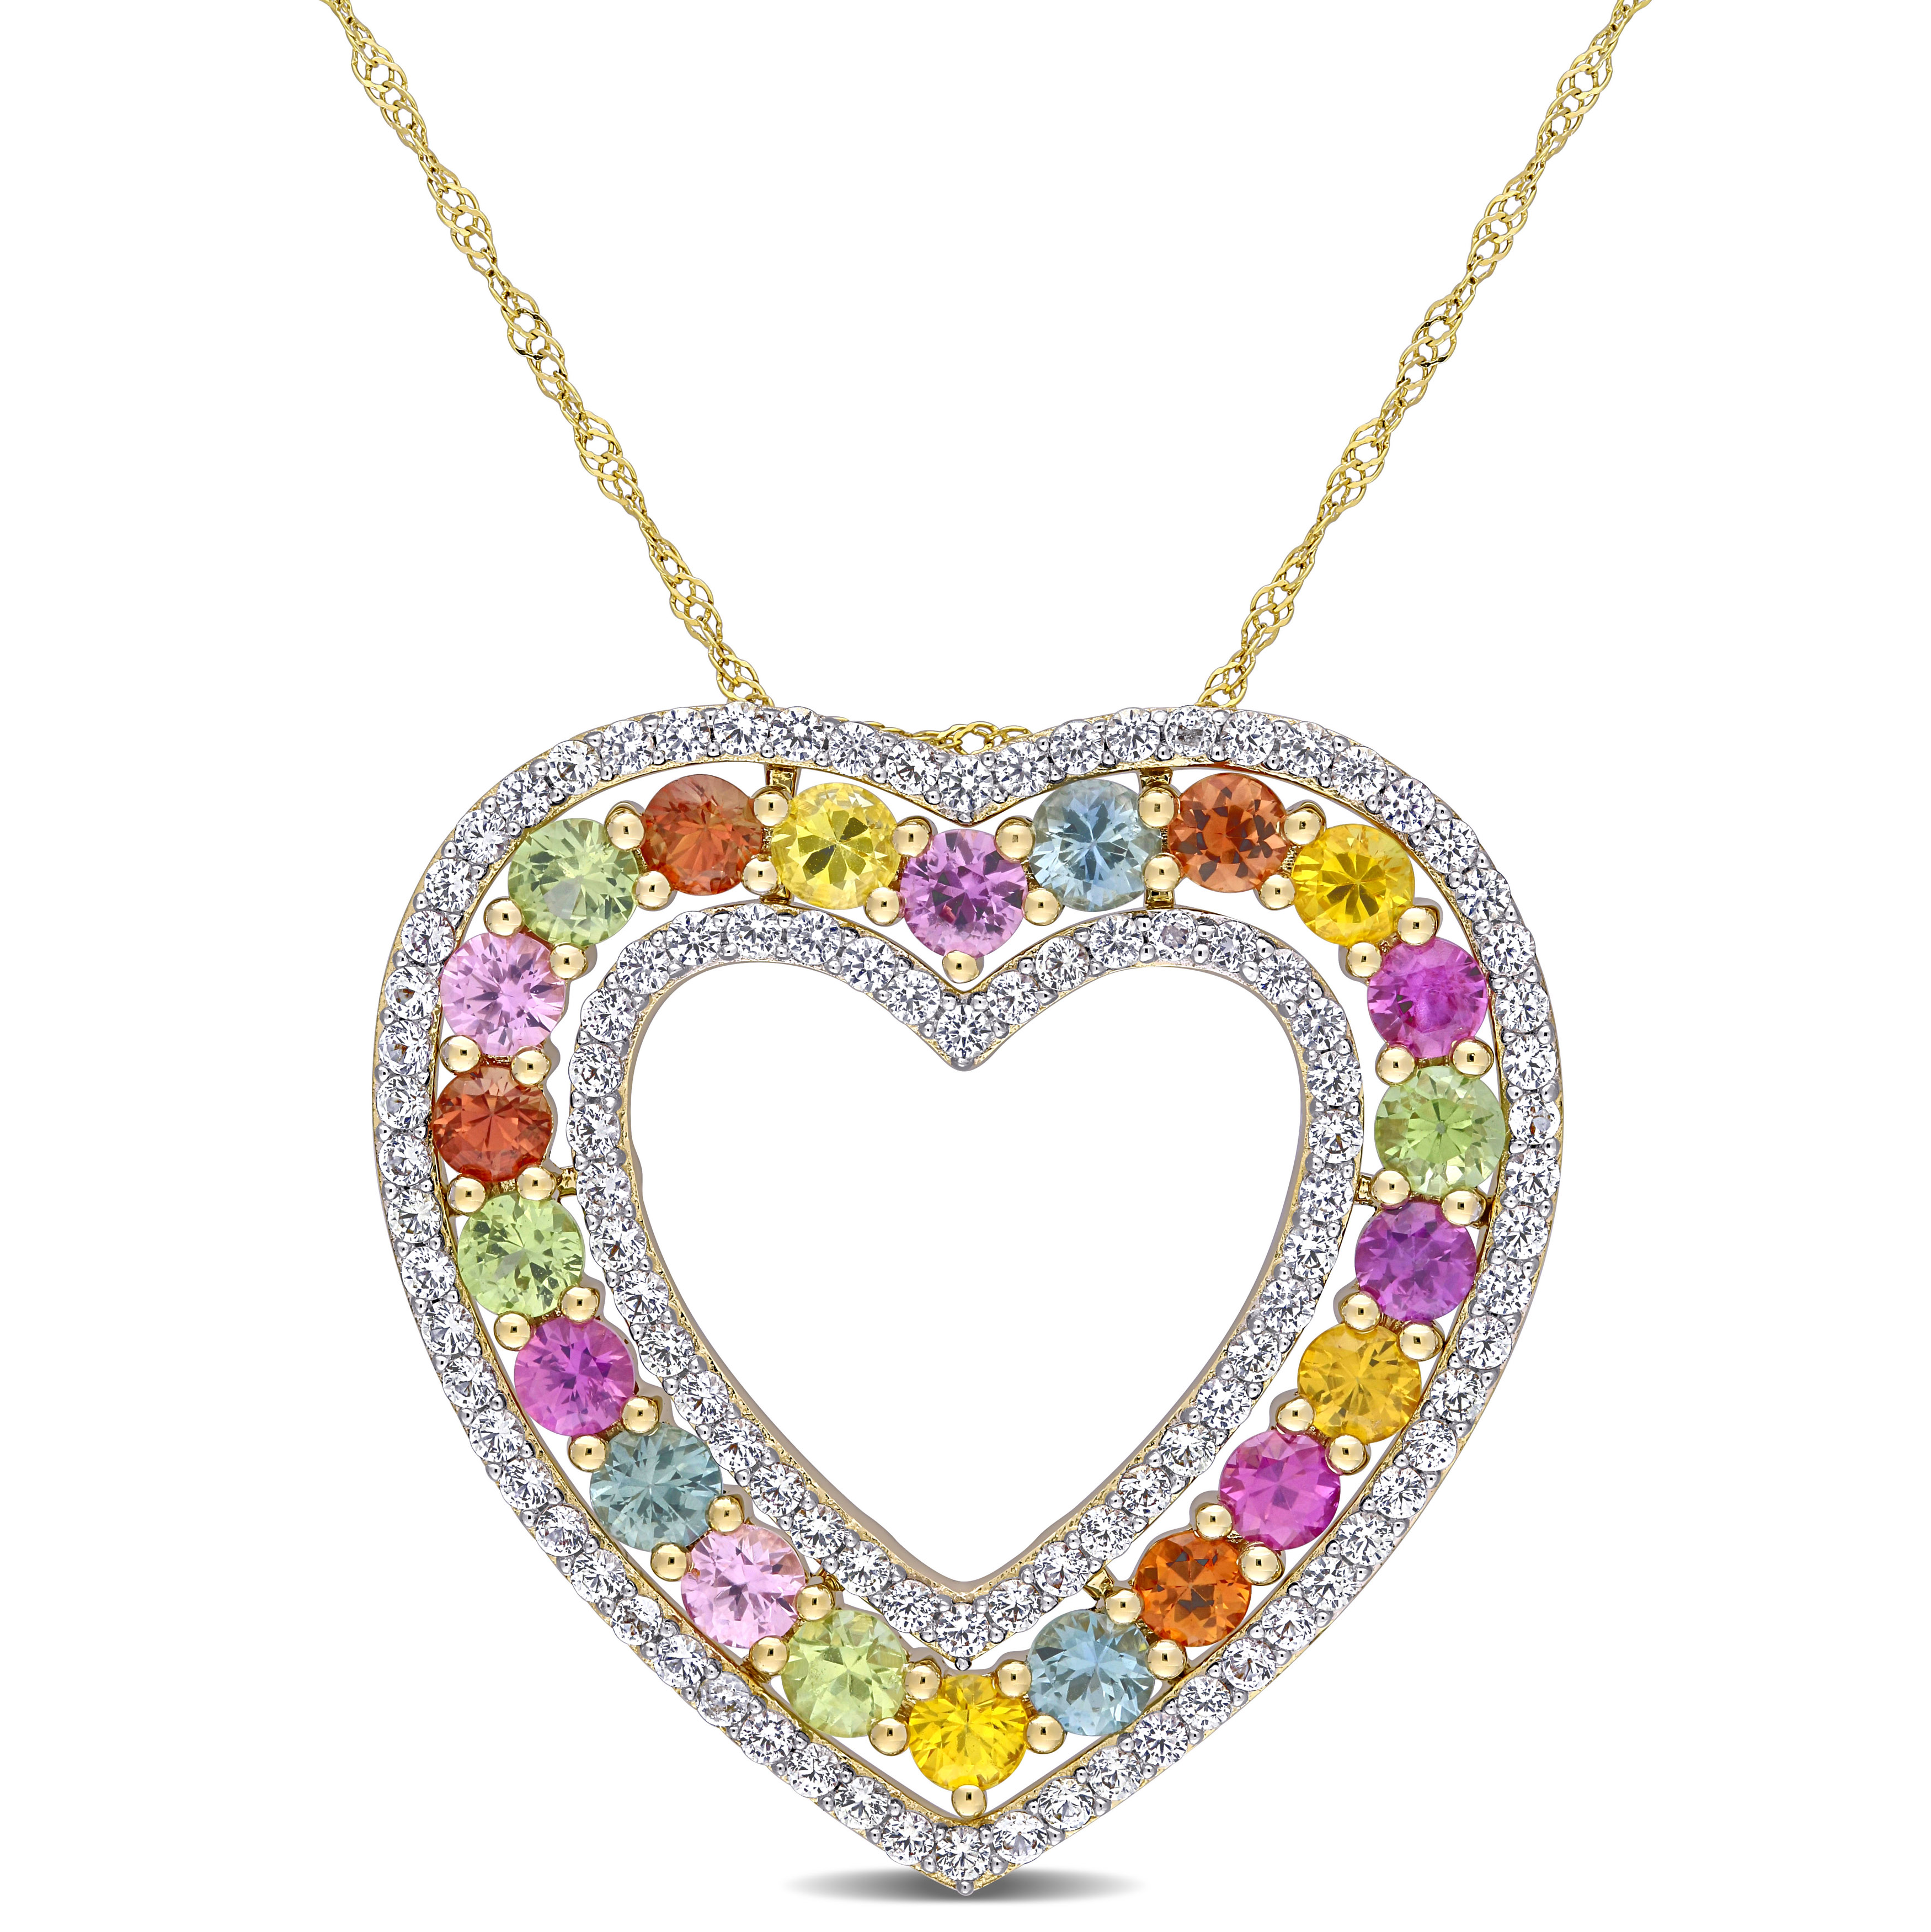 5 1/10 CT TGW Multi-Color Sapphire Heart Pendant with Chain in 14k Yellow Gold - 18 in.